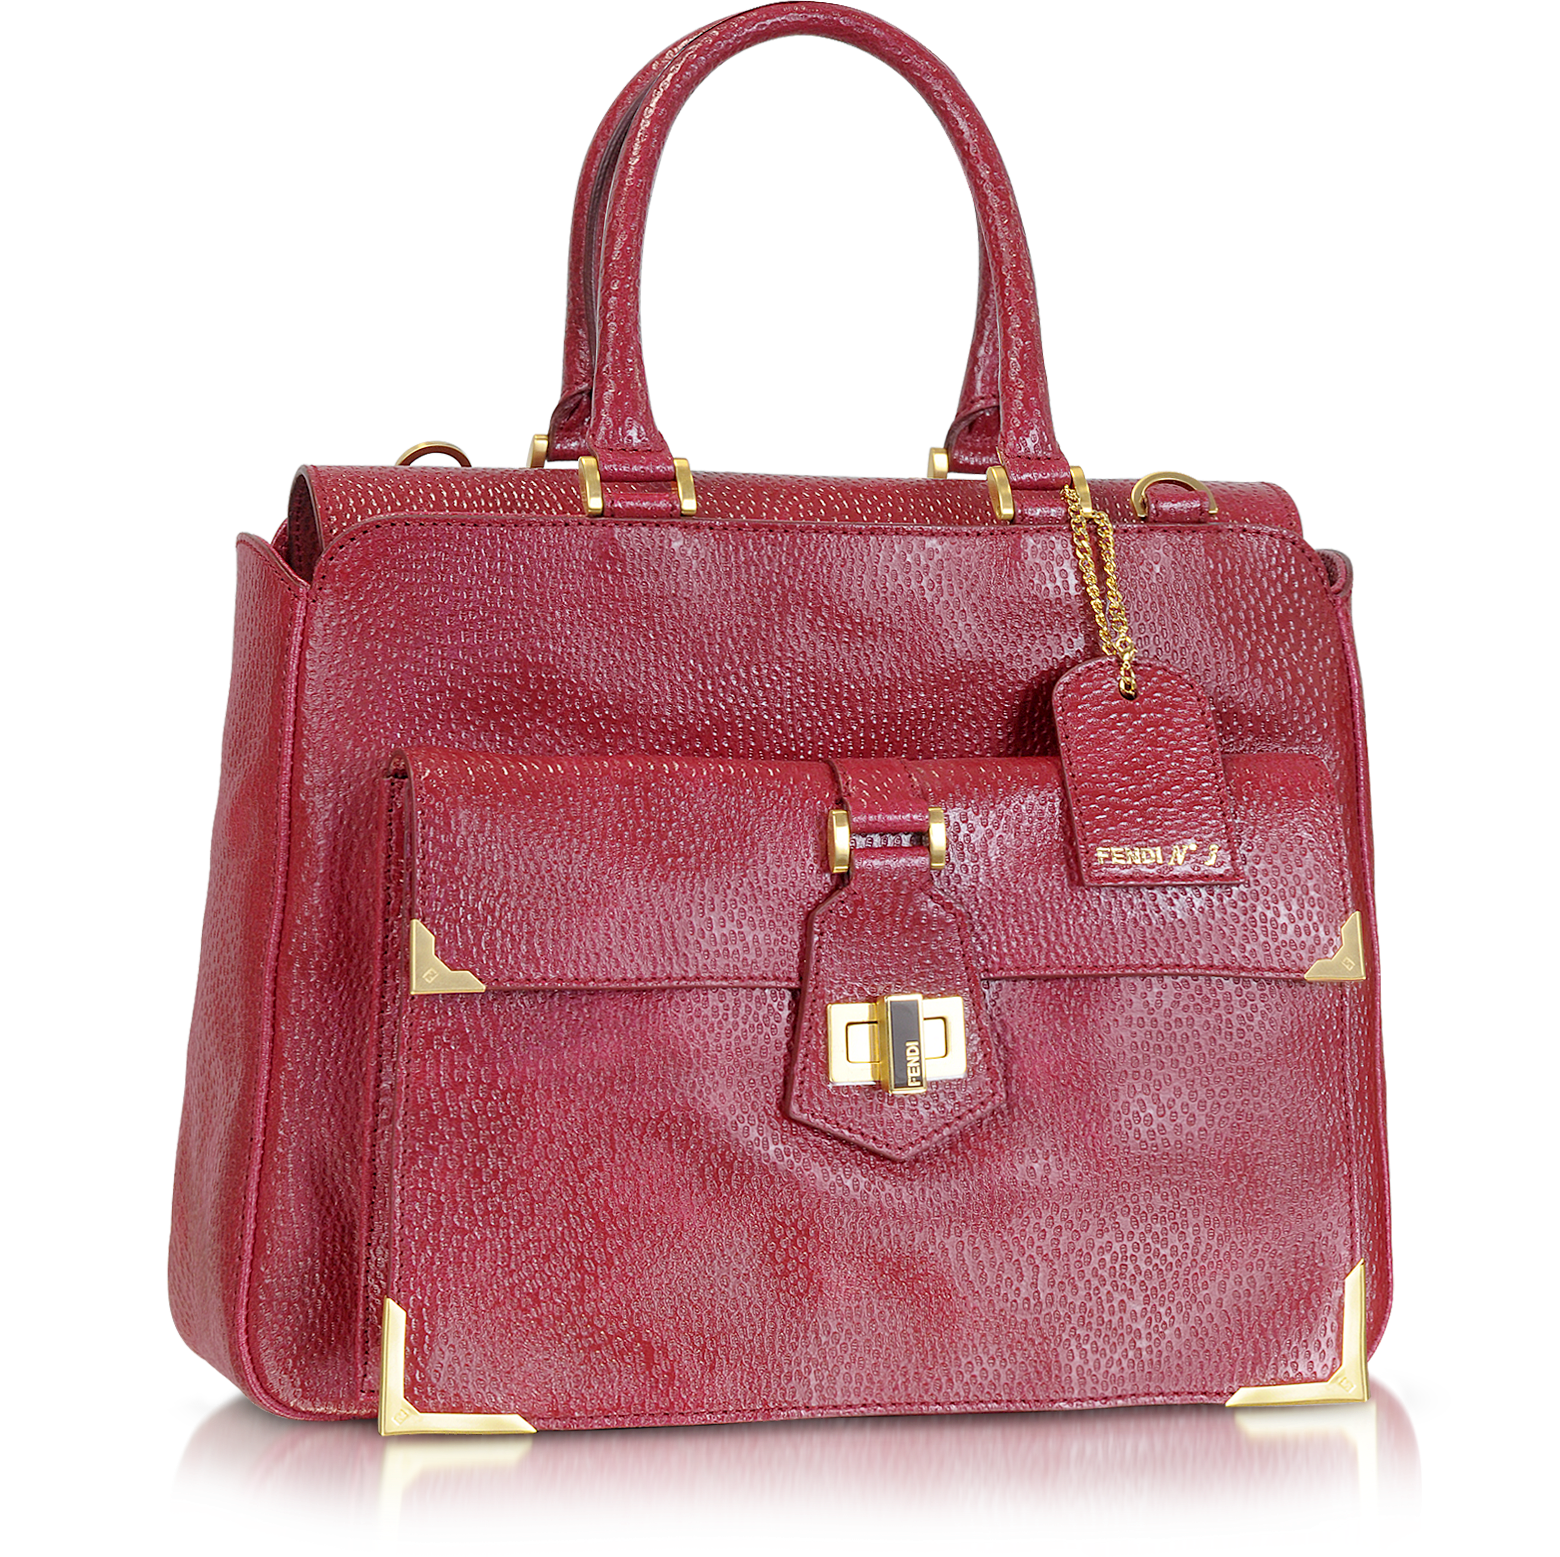 Fendi Classico No. 3 Red Leather Satchel at FORZIERI